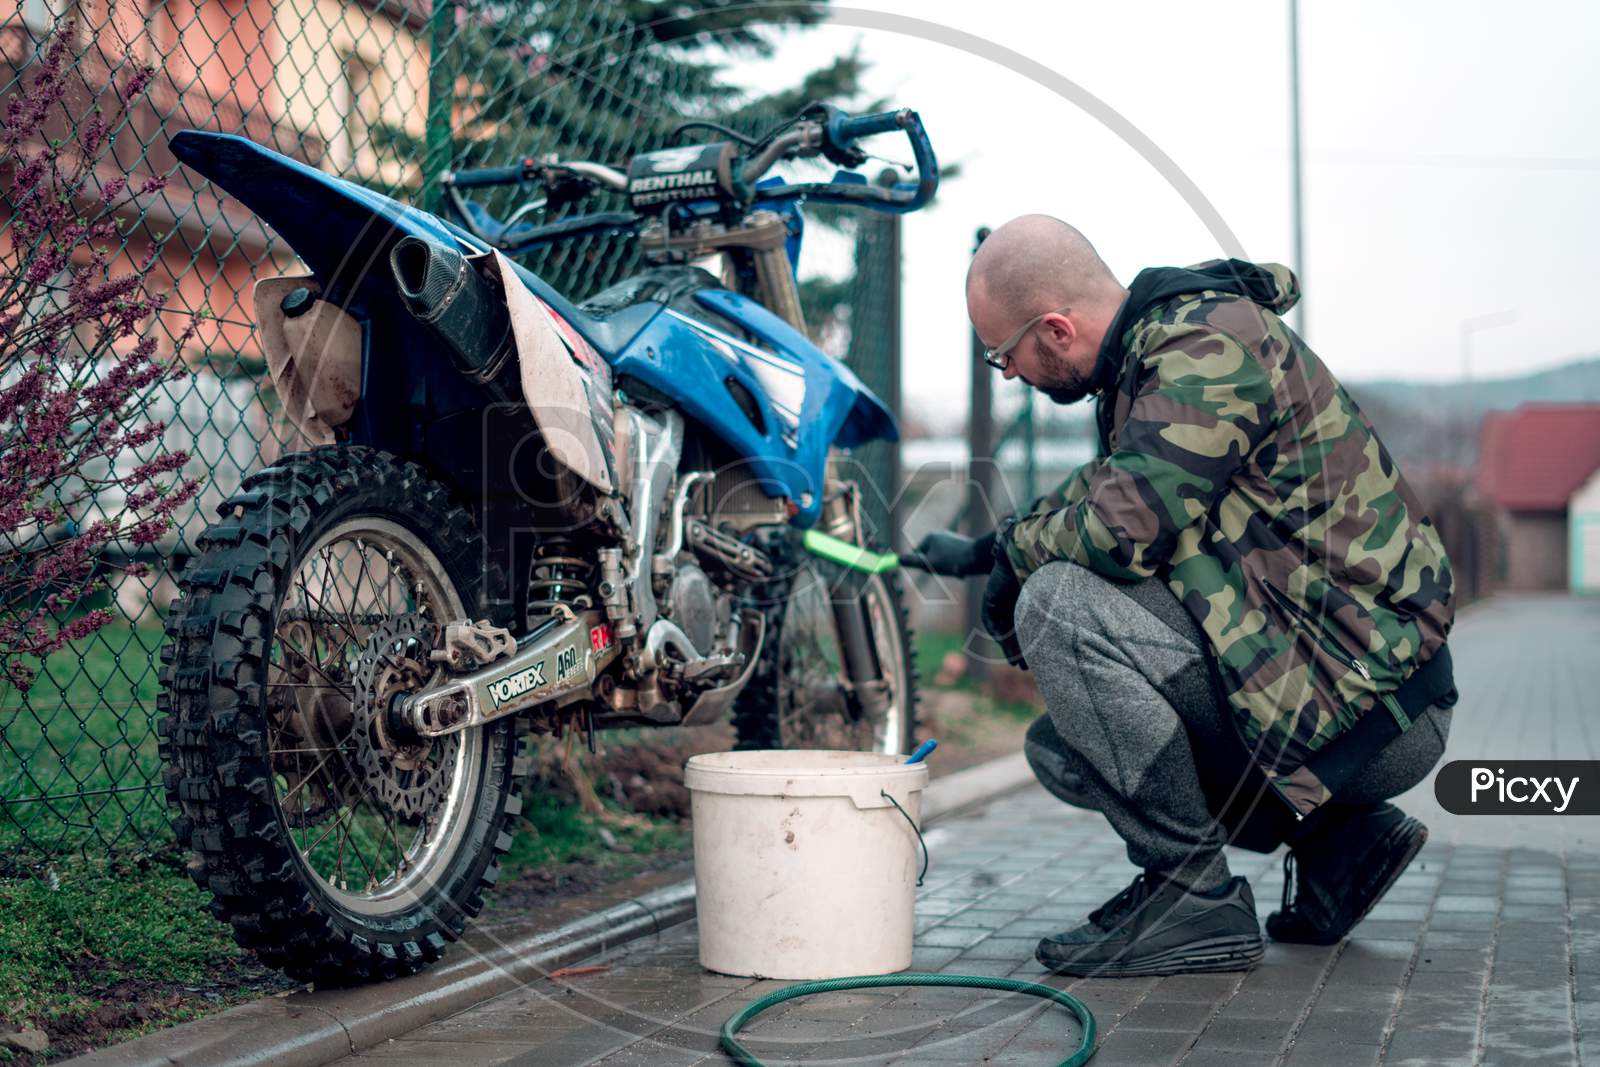 27 March 2020 Wroclaw - Motocross Yamaha WR 250r has been washed by young man.